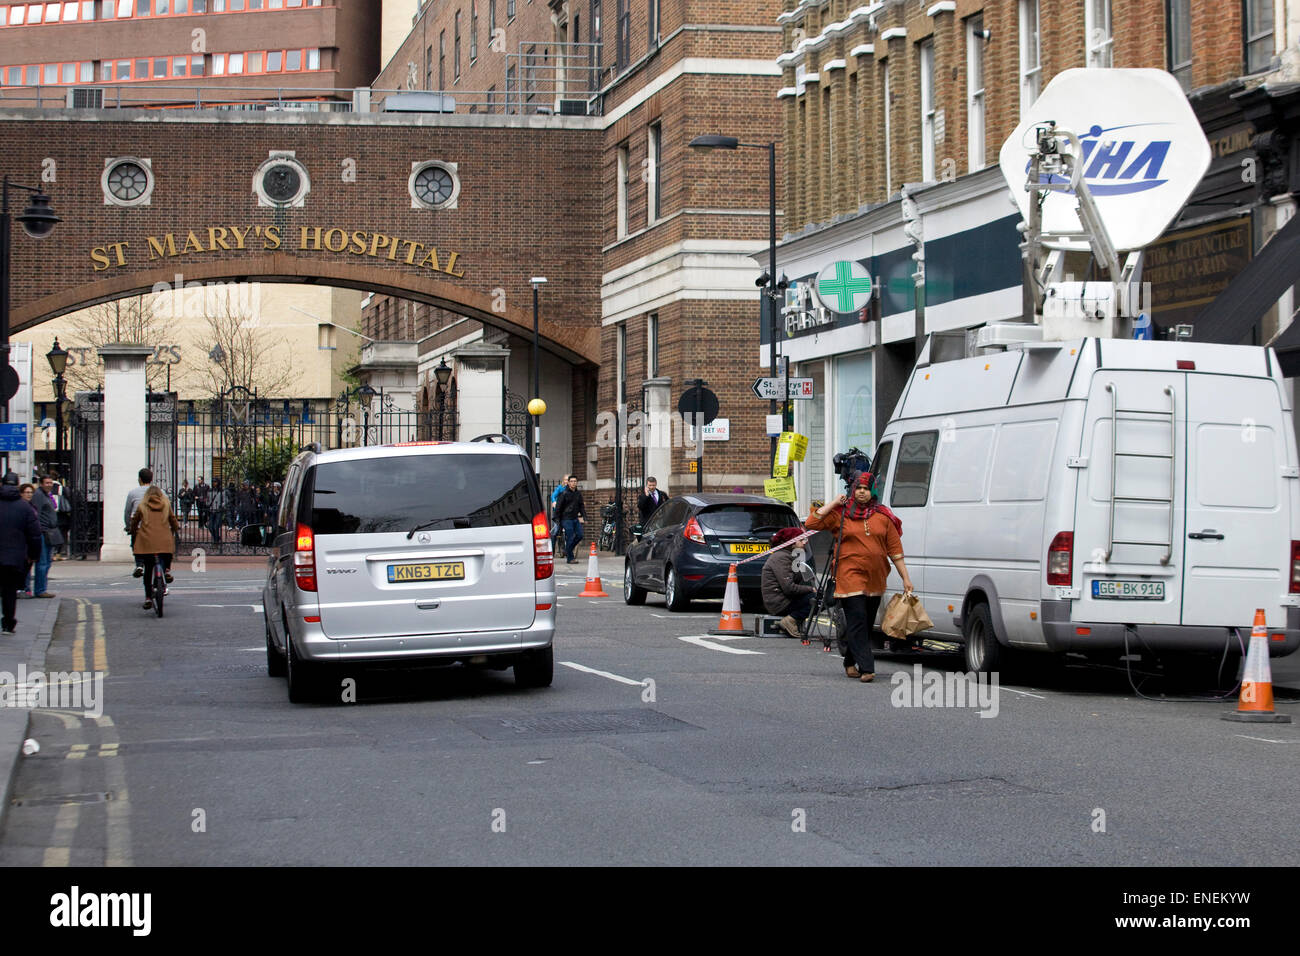 Film Crew outside St Mary's Hospital in London Stock Photo